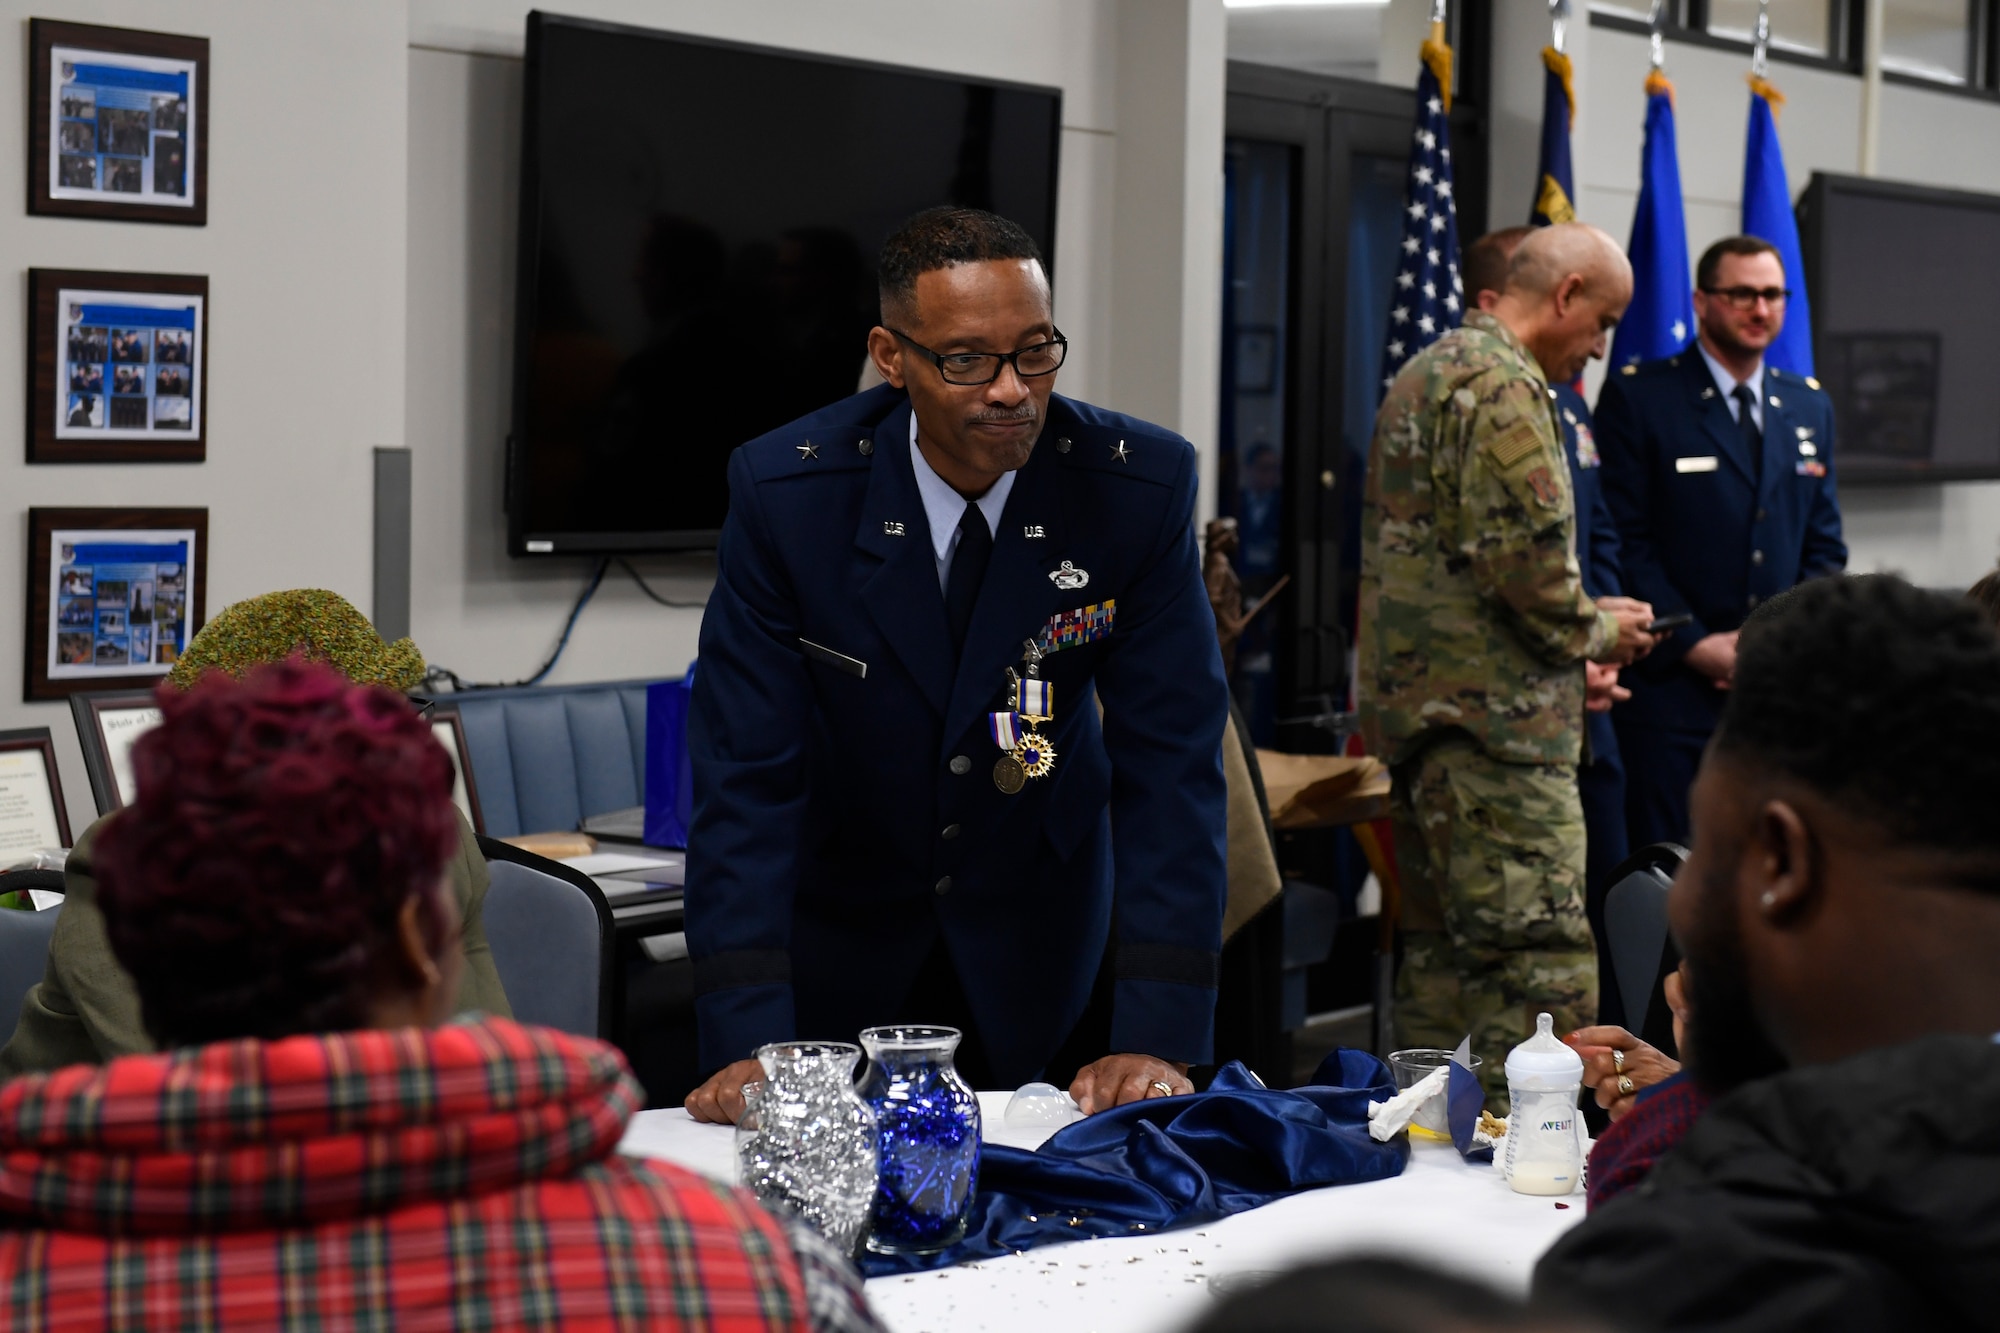 U.S. Air Force Brig. Gen. Clarence Ervin talks to family members during the retirement reception at the North Carolina Air National Guard Base (NCANG), Charlotte Douglas International Airport, Feb. 09, 2019. Family, friends and guard members gathered to celebrate the retirement of Gen. Ervin, Chief of Staff for the NCANG, after serving in the military for 37 years.